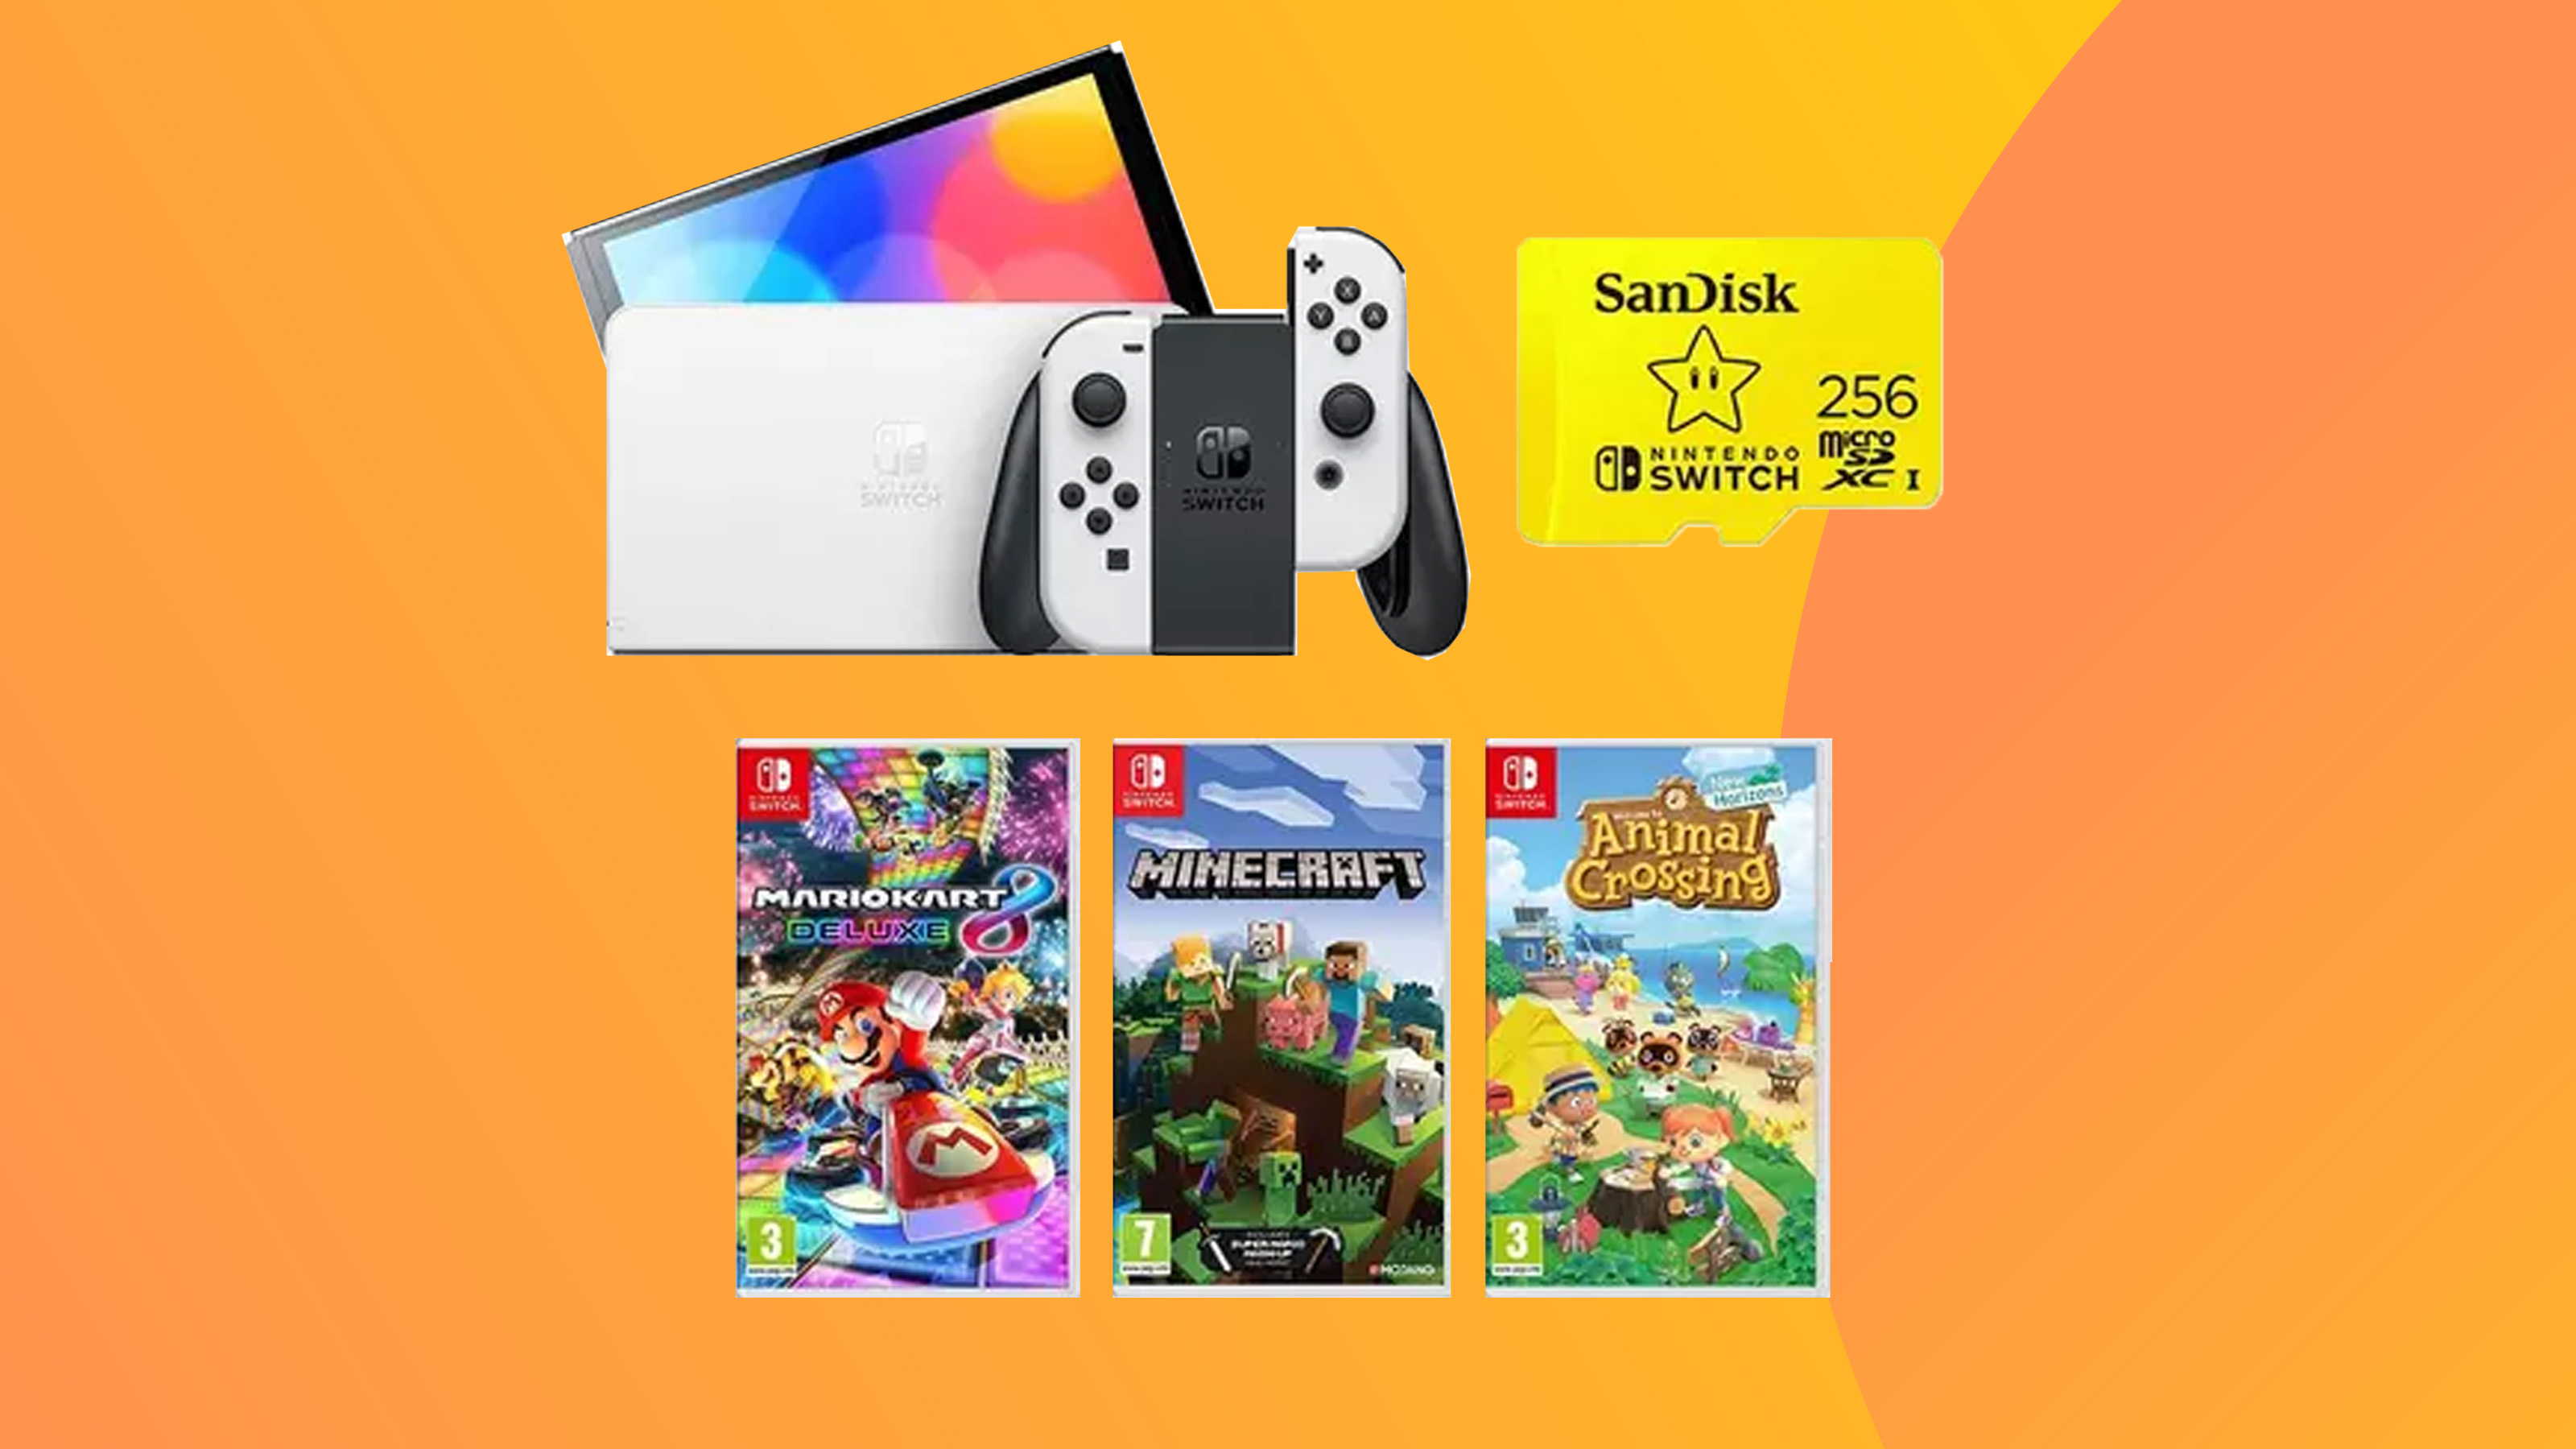 A product shot of the Nintendo Switch OLED package against a colorful background